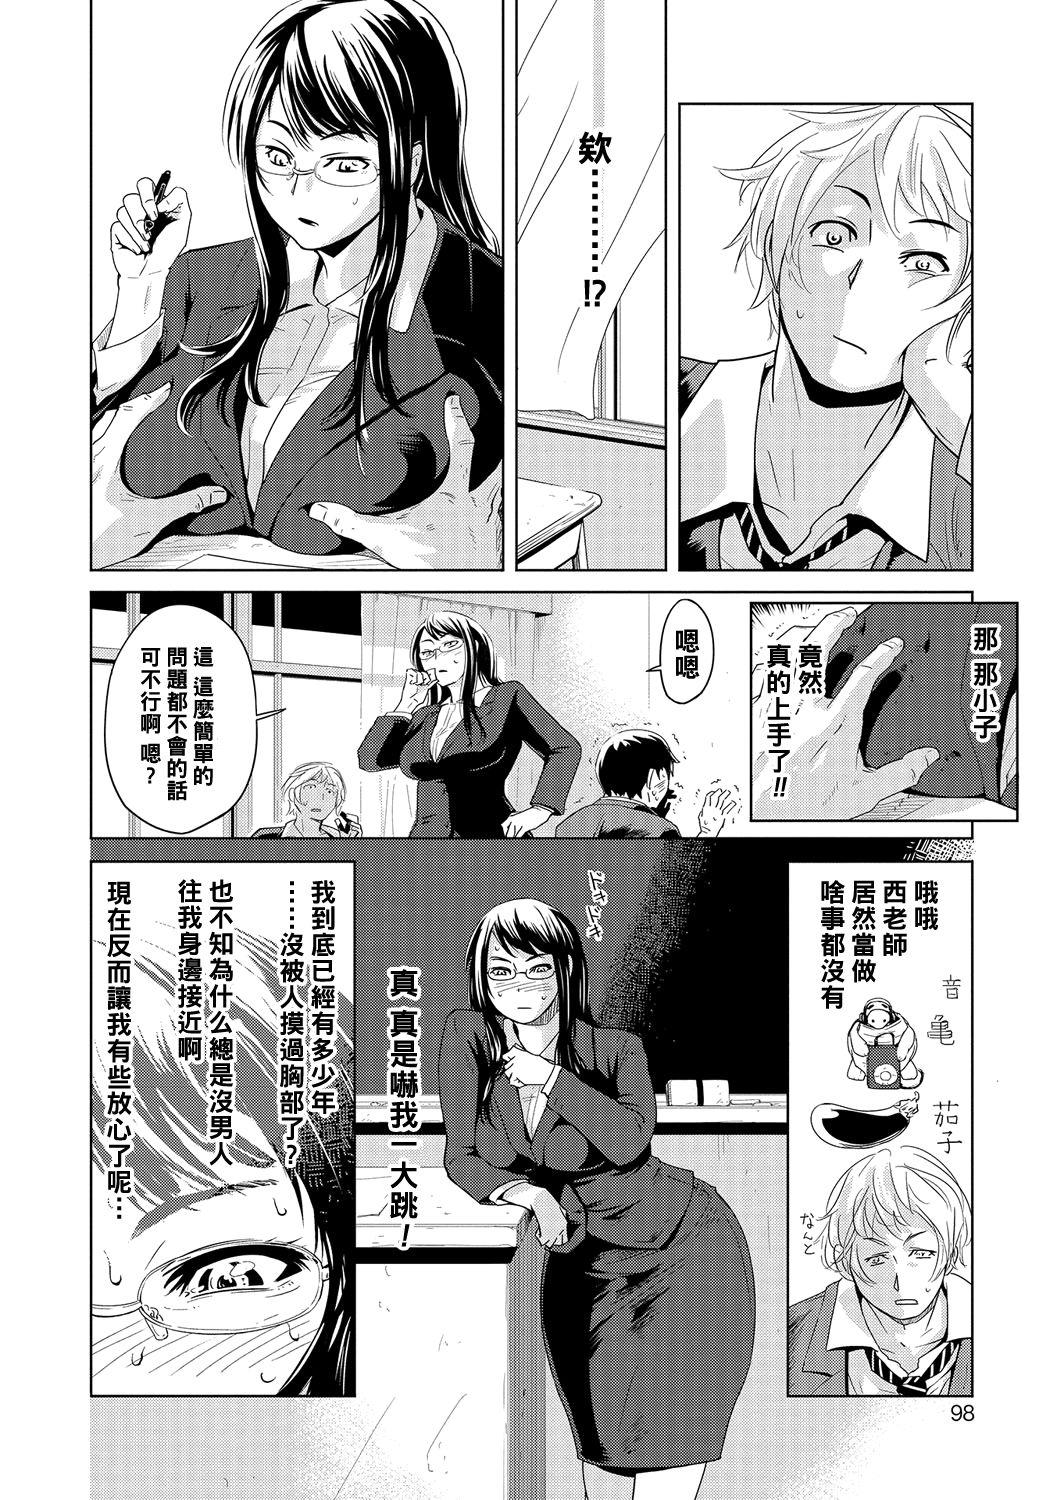 Spy Camera 補習戦略～西彩子先生の場合～（Chinese） Shemales - Page 4